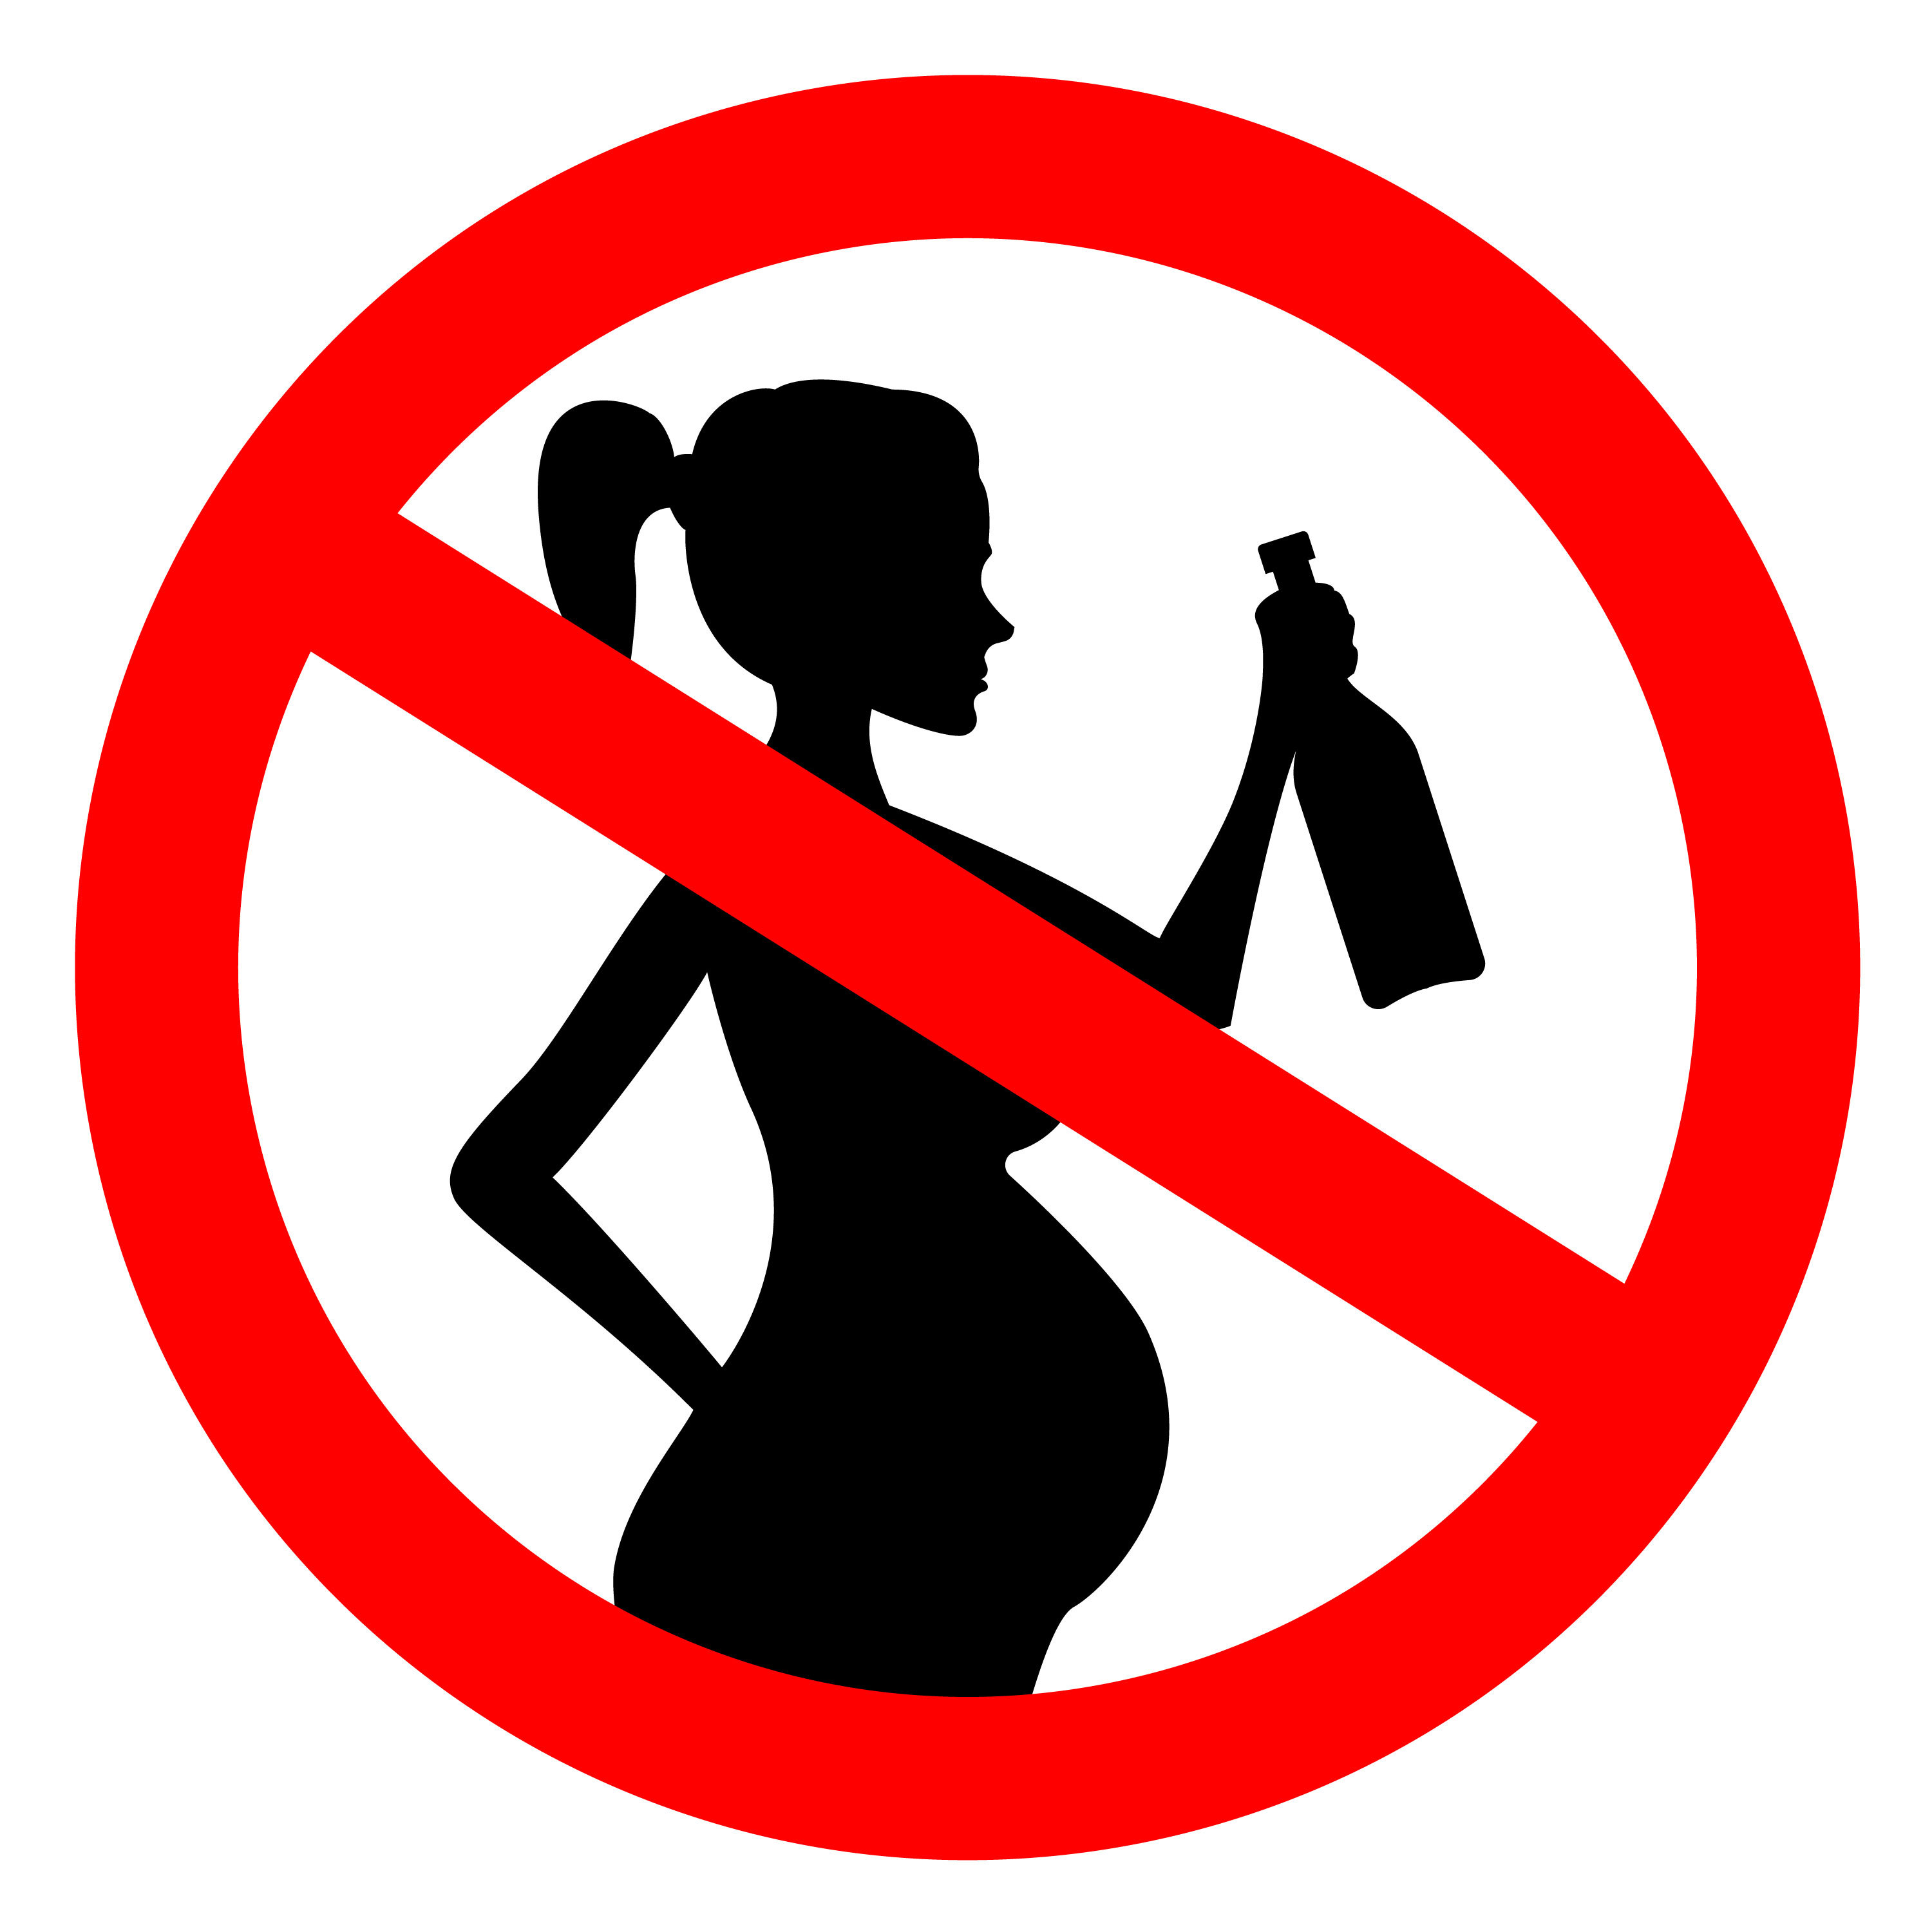 Is it safe to drink alcohol during pregnancy?